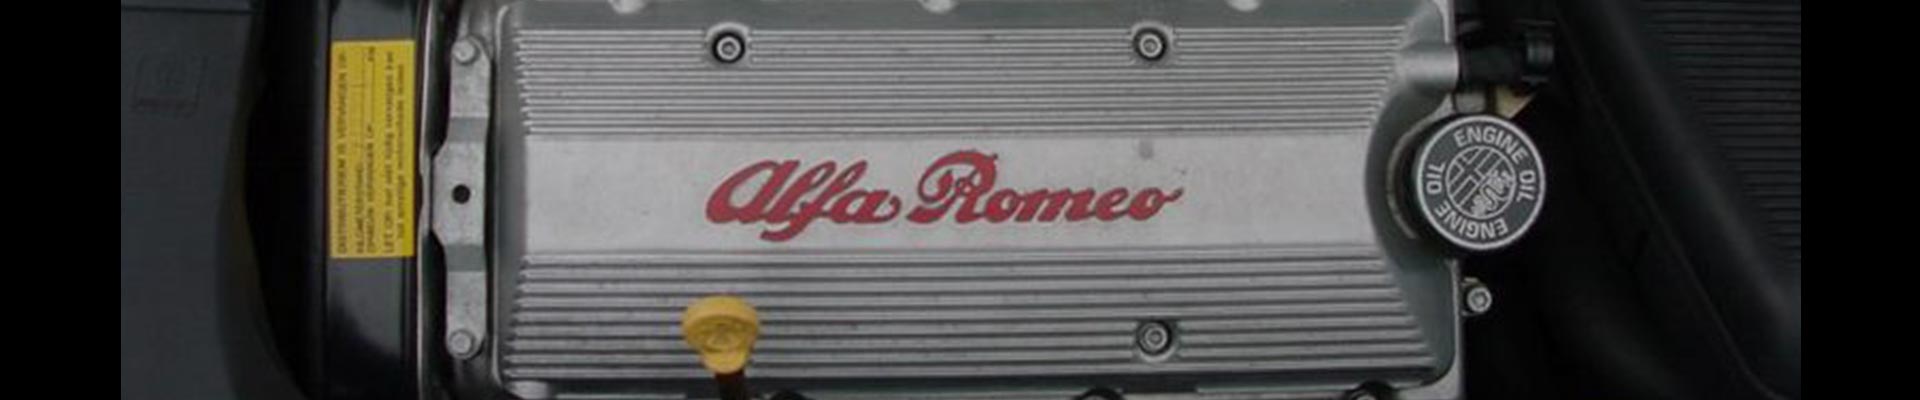 Shop Replacement 1992 Alfa Romeo 164 Parts with Discounted Price on the Net